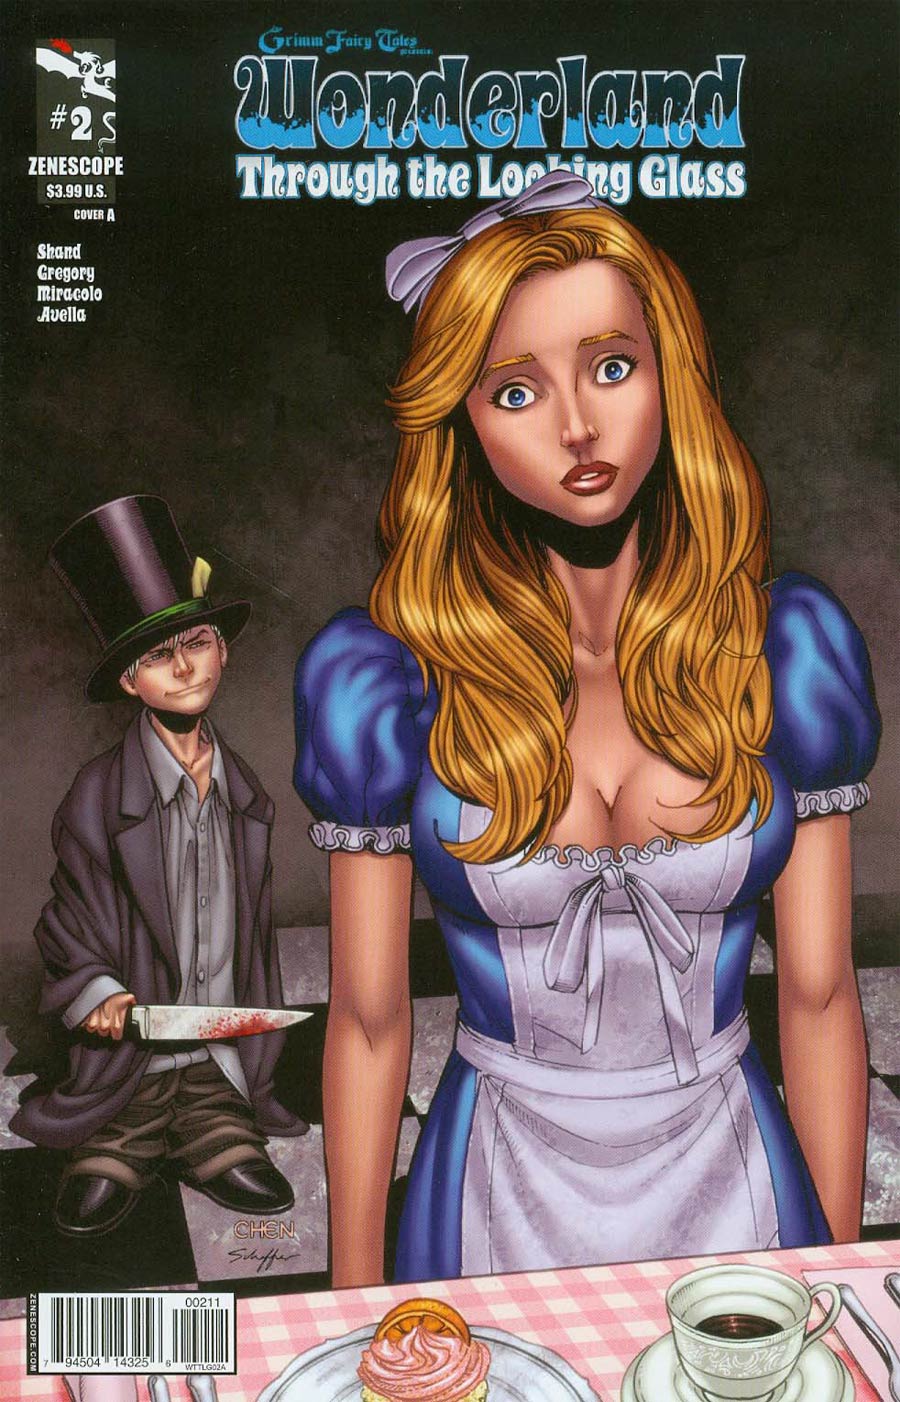 Grimm Fairy Tales Presents Wonderland Through The Looking Glass #2 Cover A Sean Chen